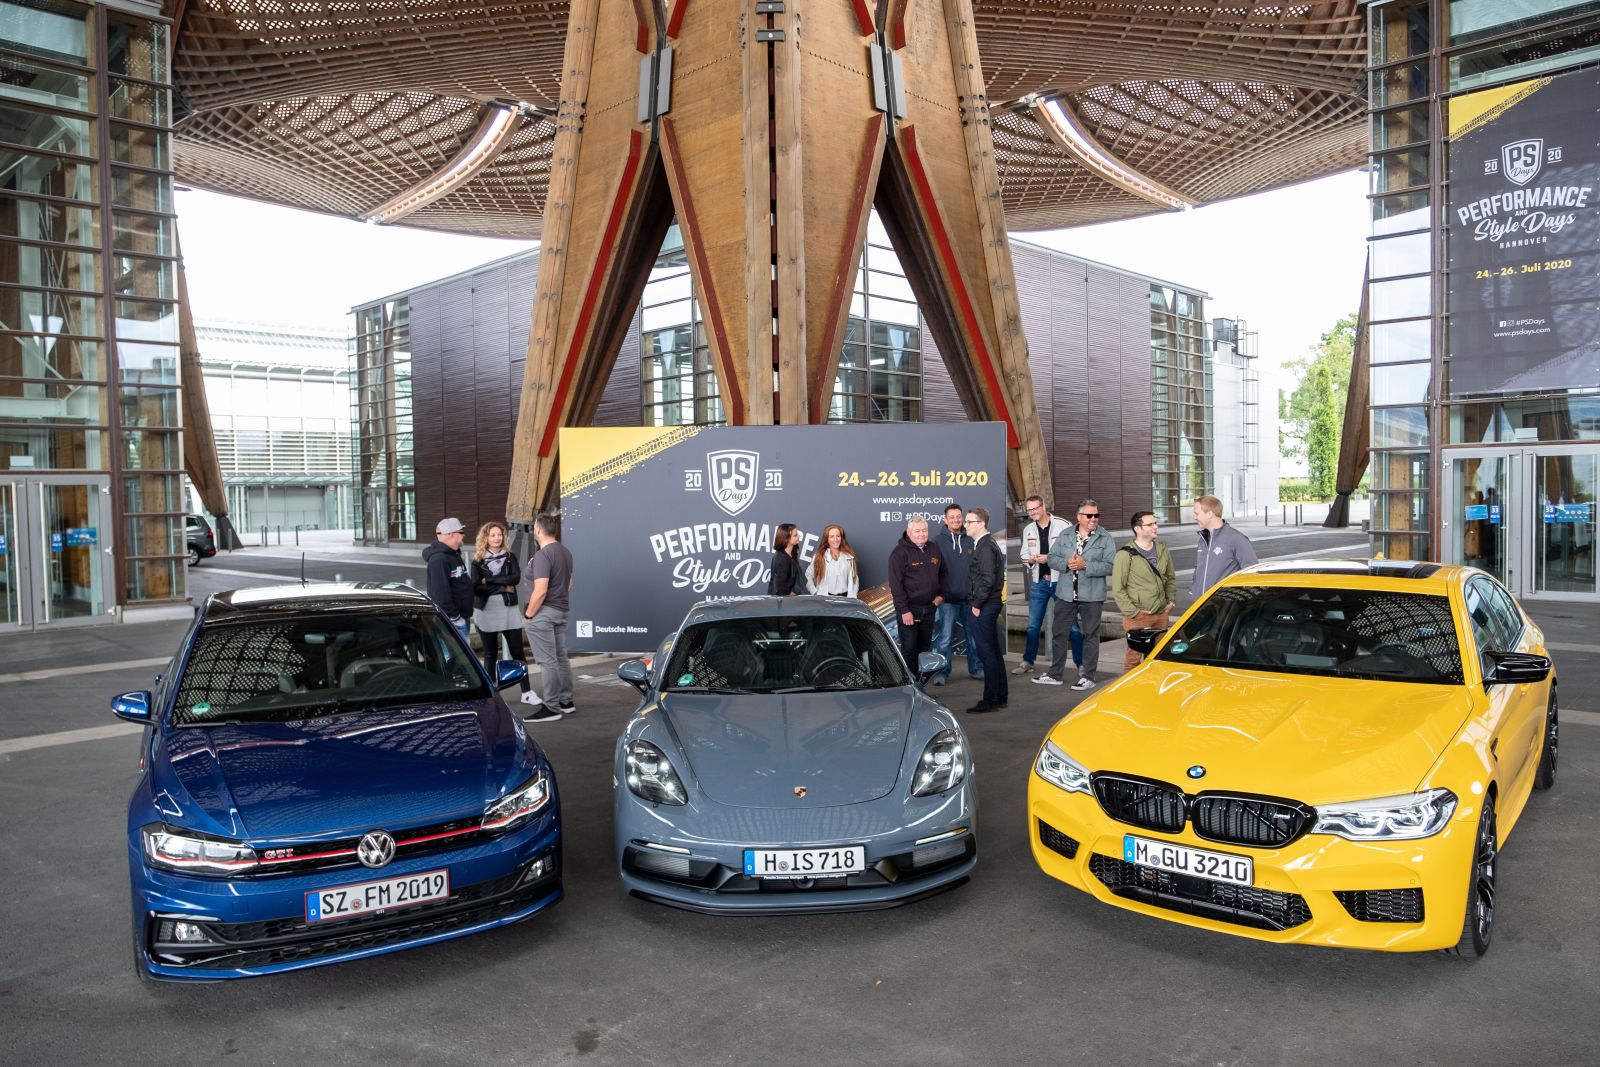 Germany’s Federal Government tends to prioritise the interests of the automotive industry over the global transition to sustainability: cars on display for promotional purposes at Hannover fairgrounds in 2019.